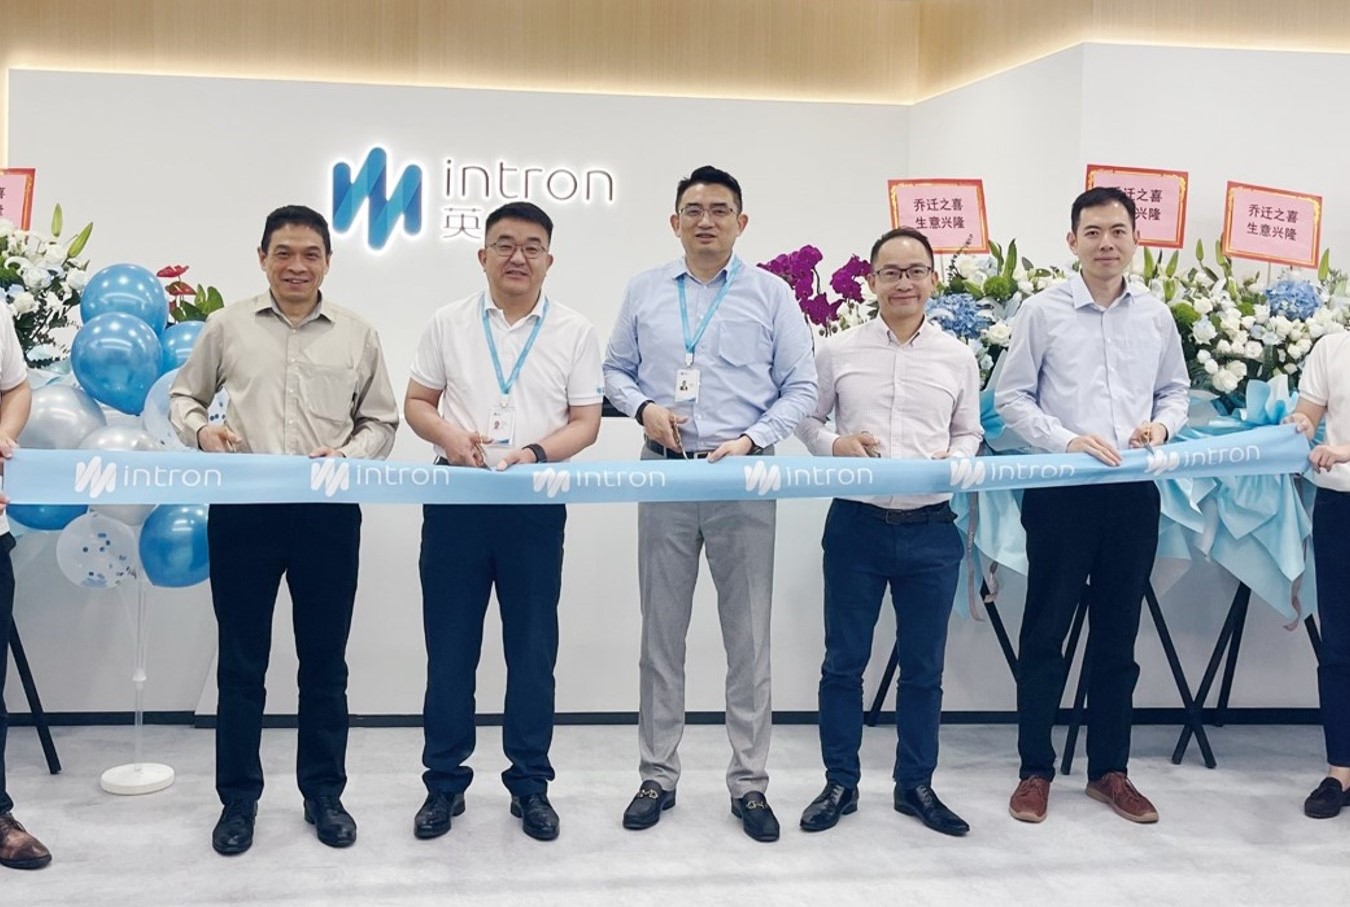 Sets sail on an exciting new journey | Shenzhen Intron starts operation at new a...